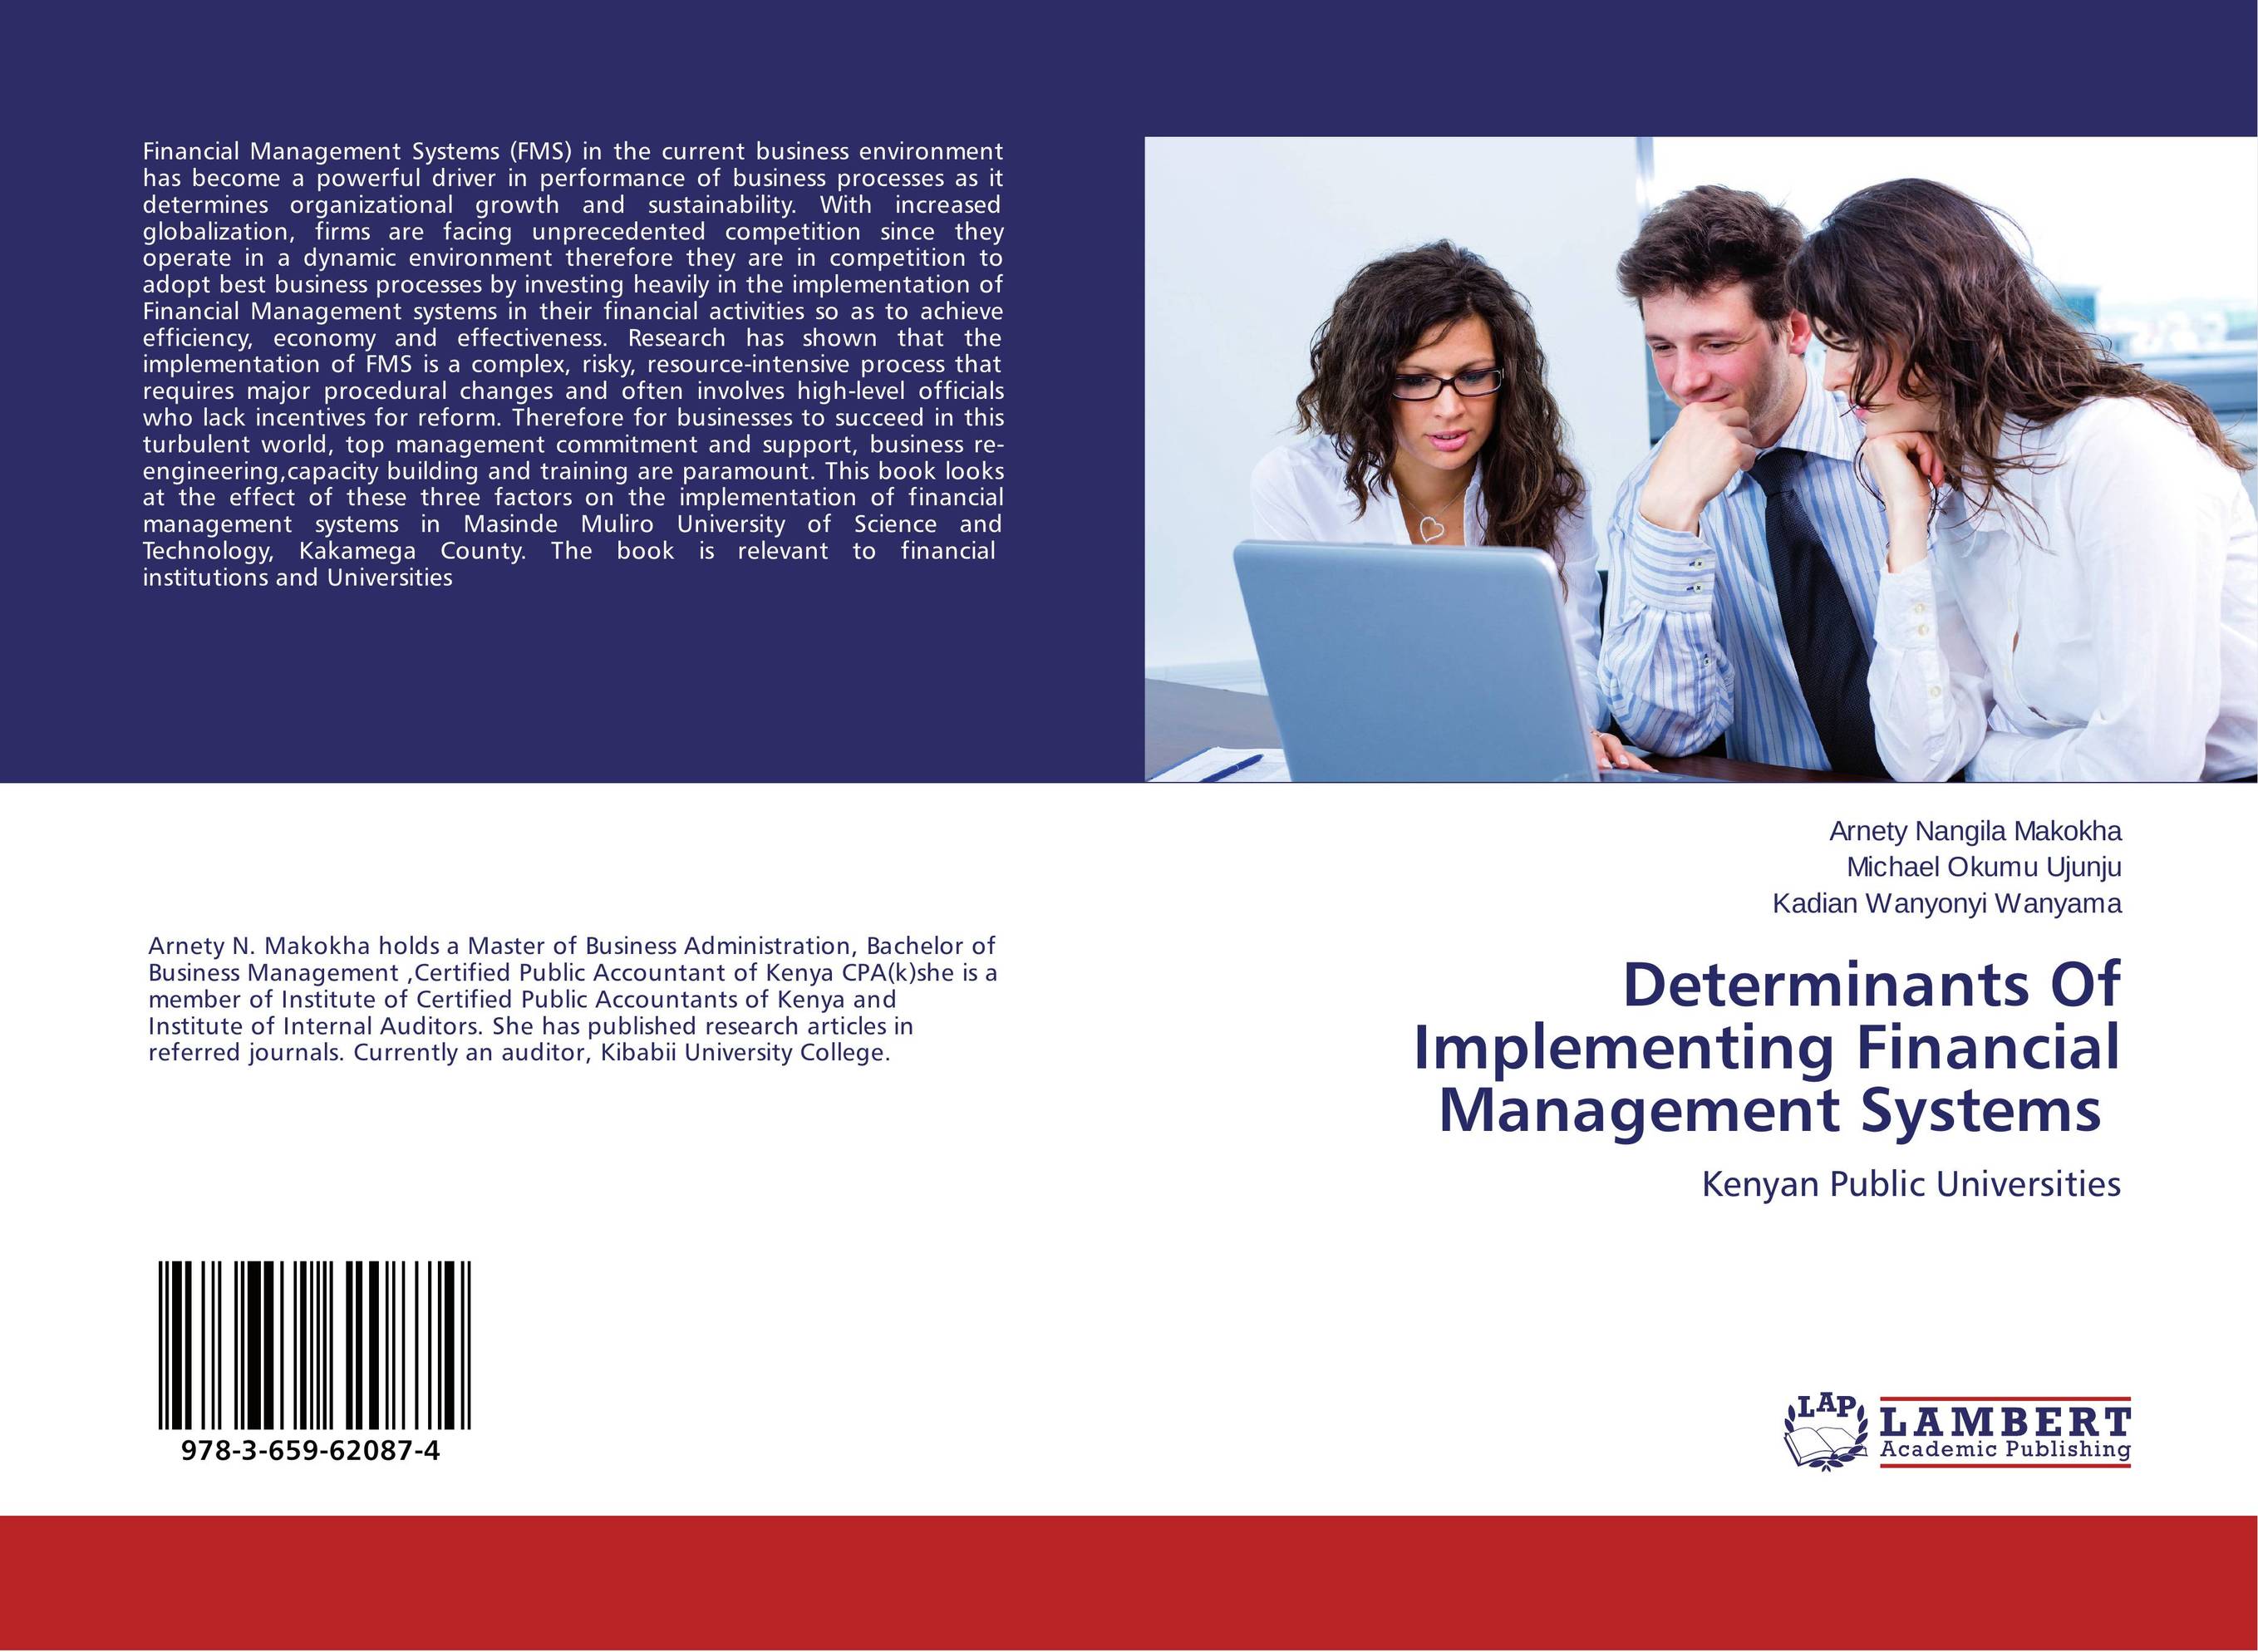 Determinants Of Implementing Financial Management Systems